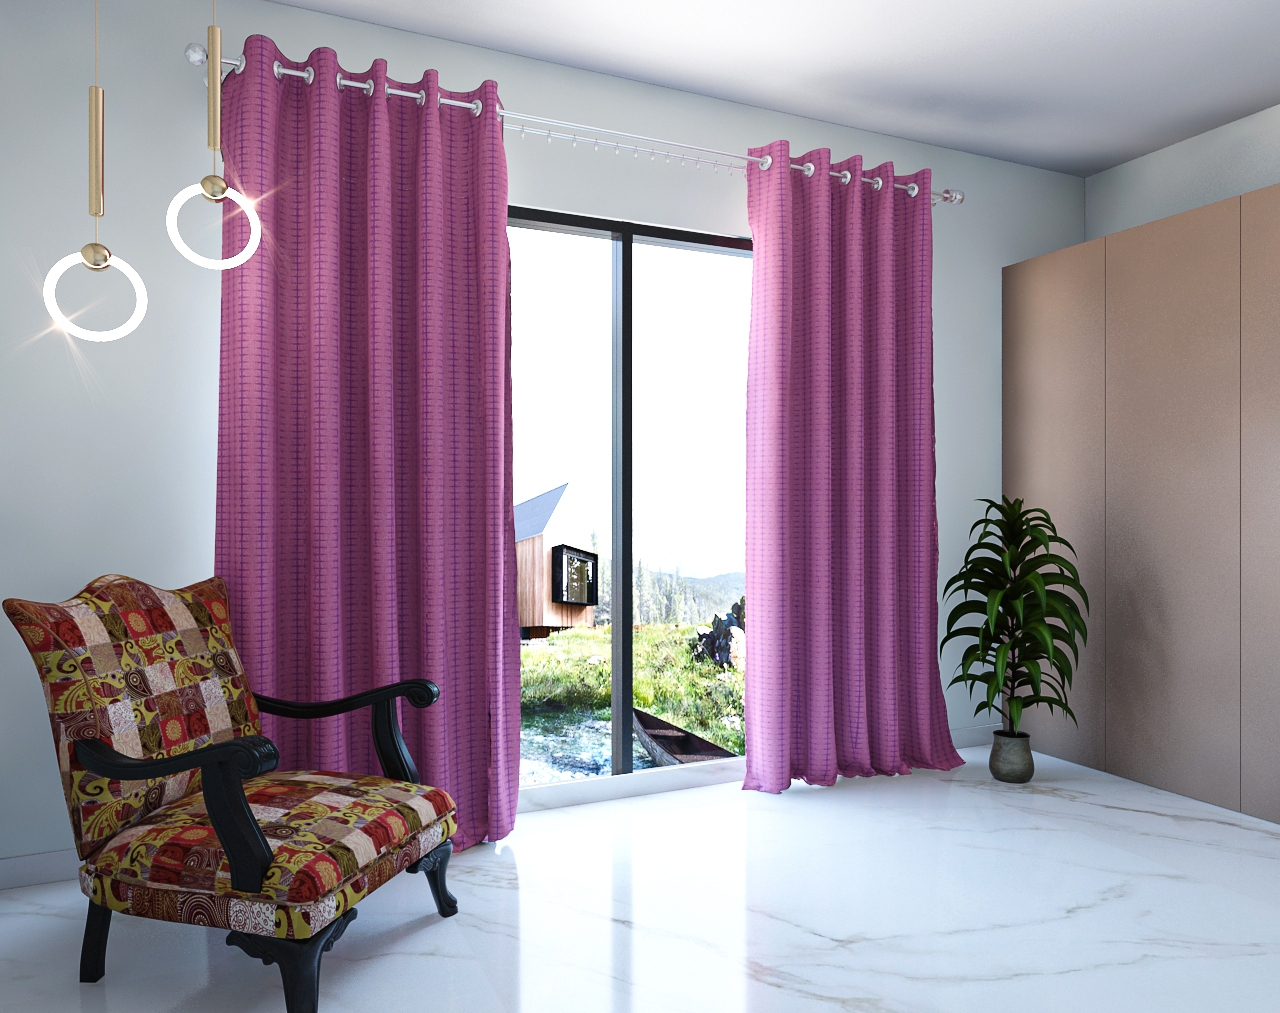 Boria Bistar | Handloom Cotton Curtains for Door with button and loop|0